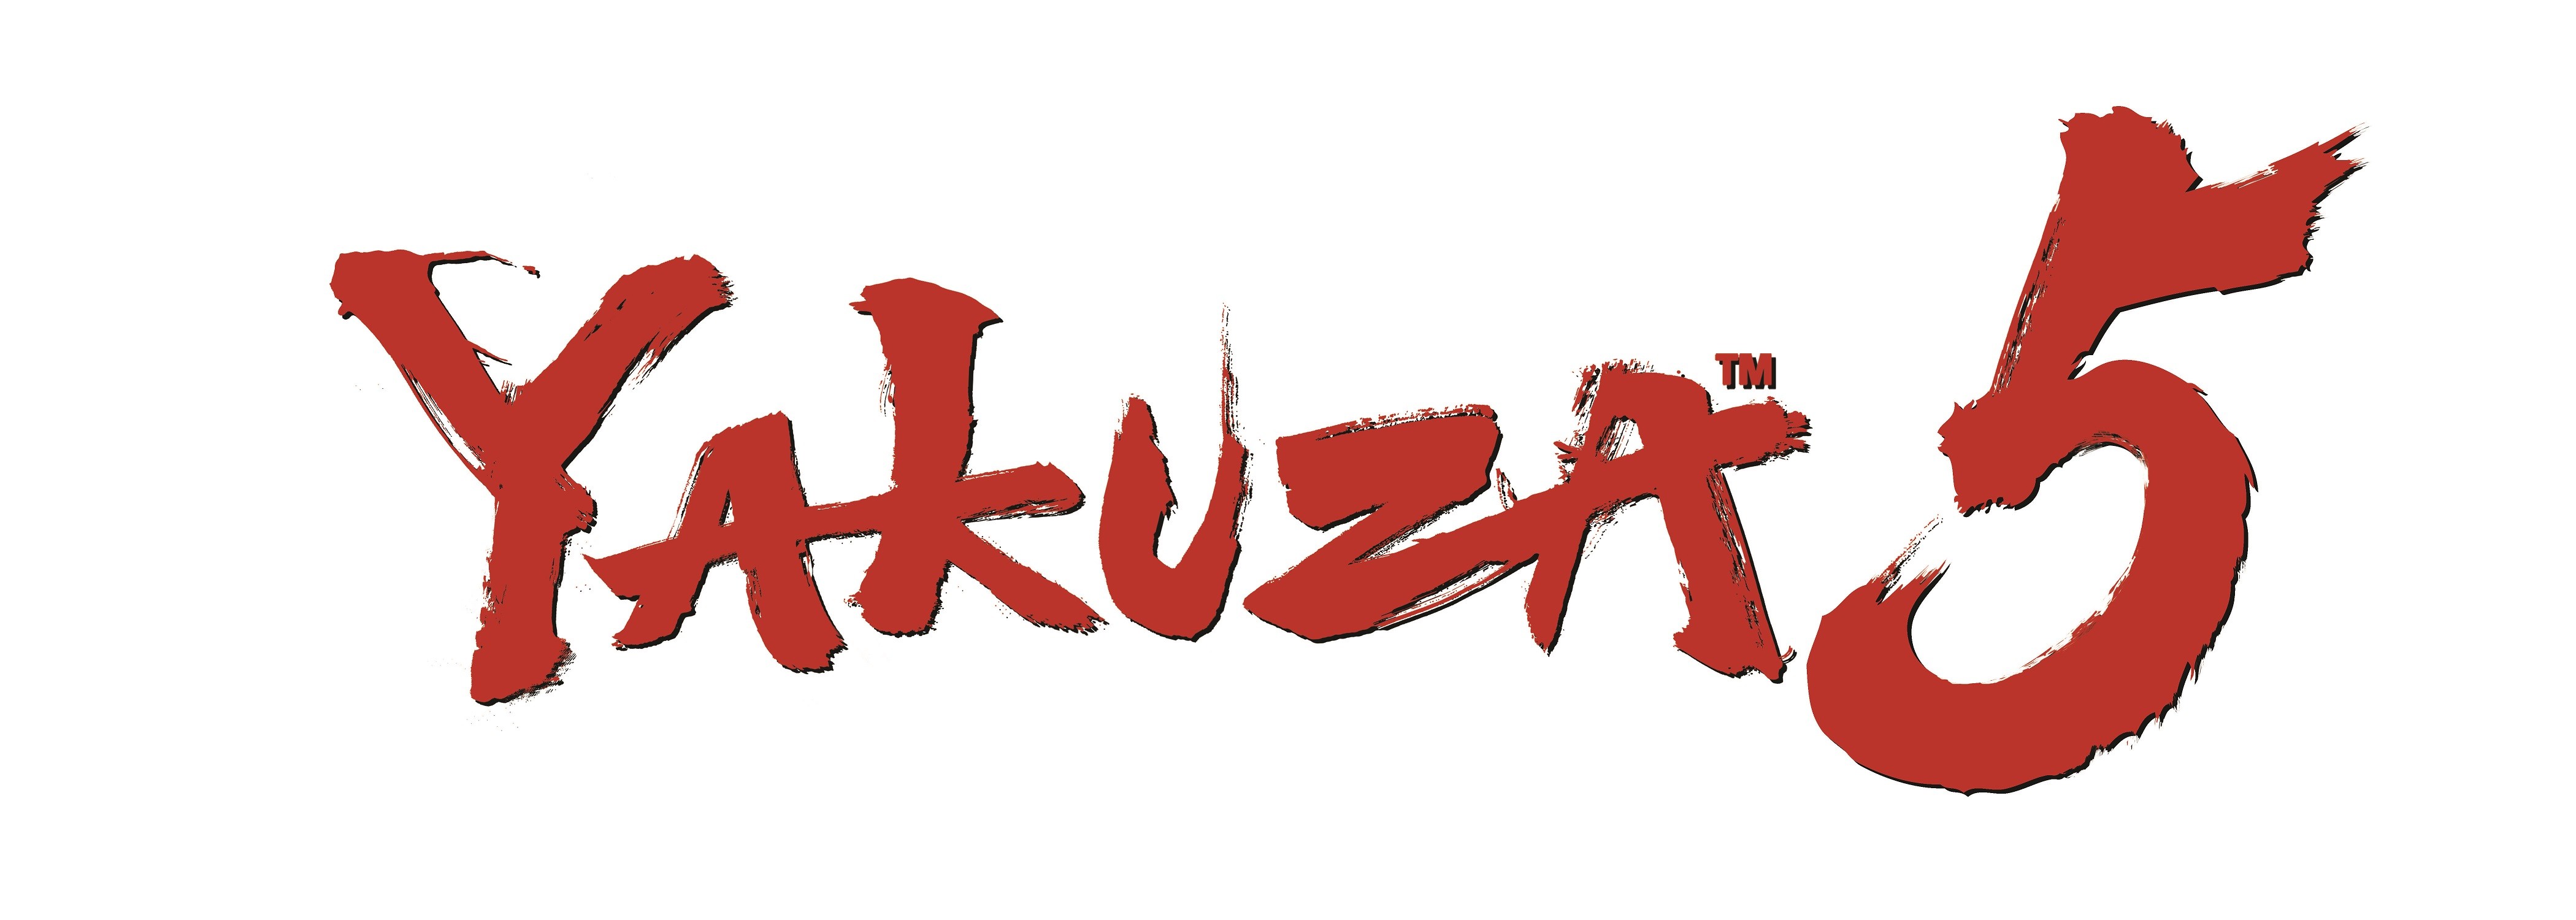 Yakuza-5-Is-Finally-Coming-to-the-West-in-2015-467105-2.jpg